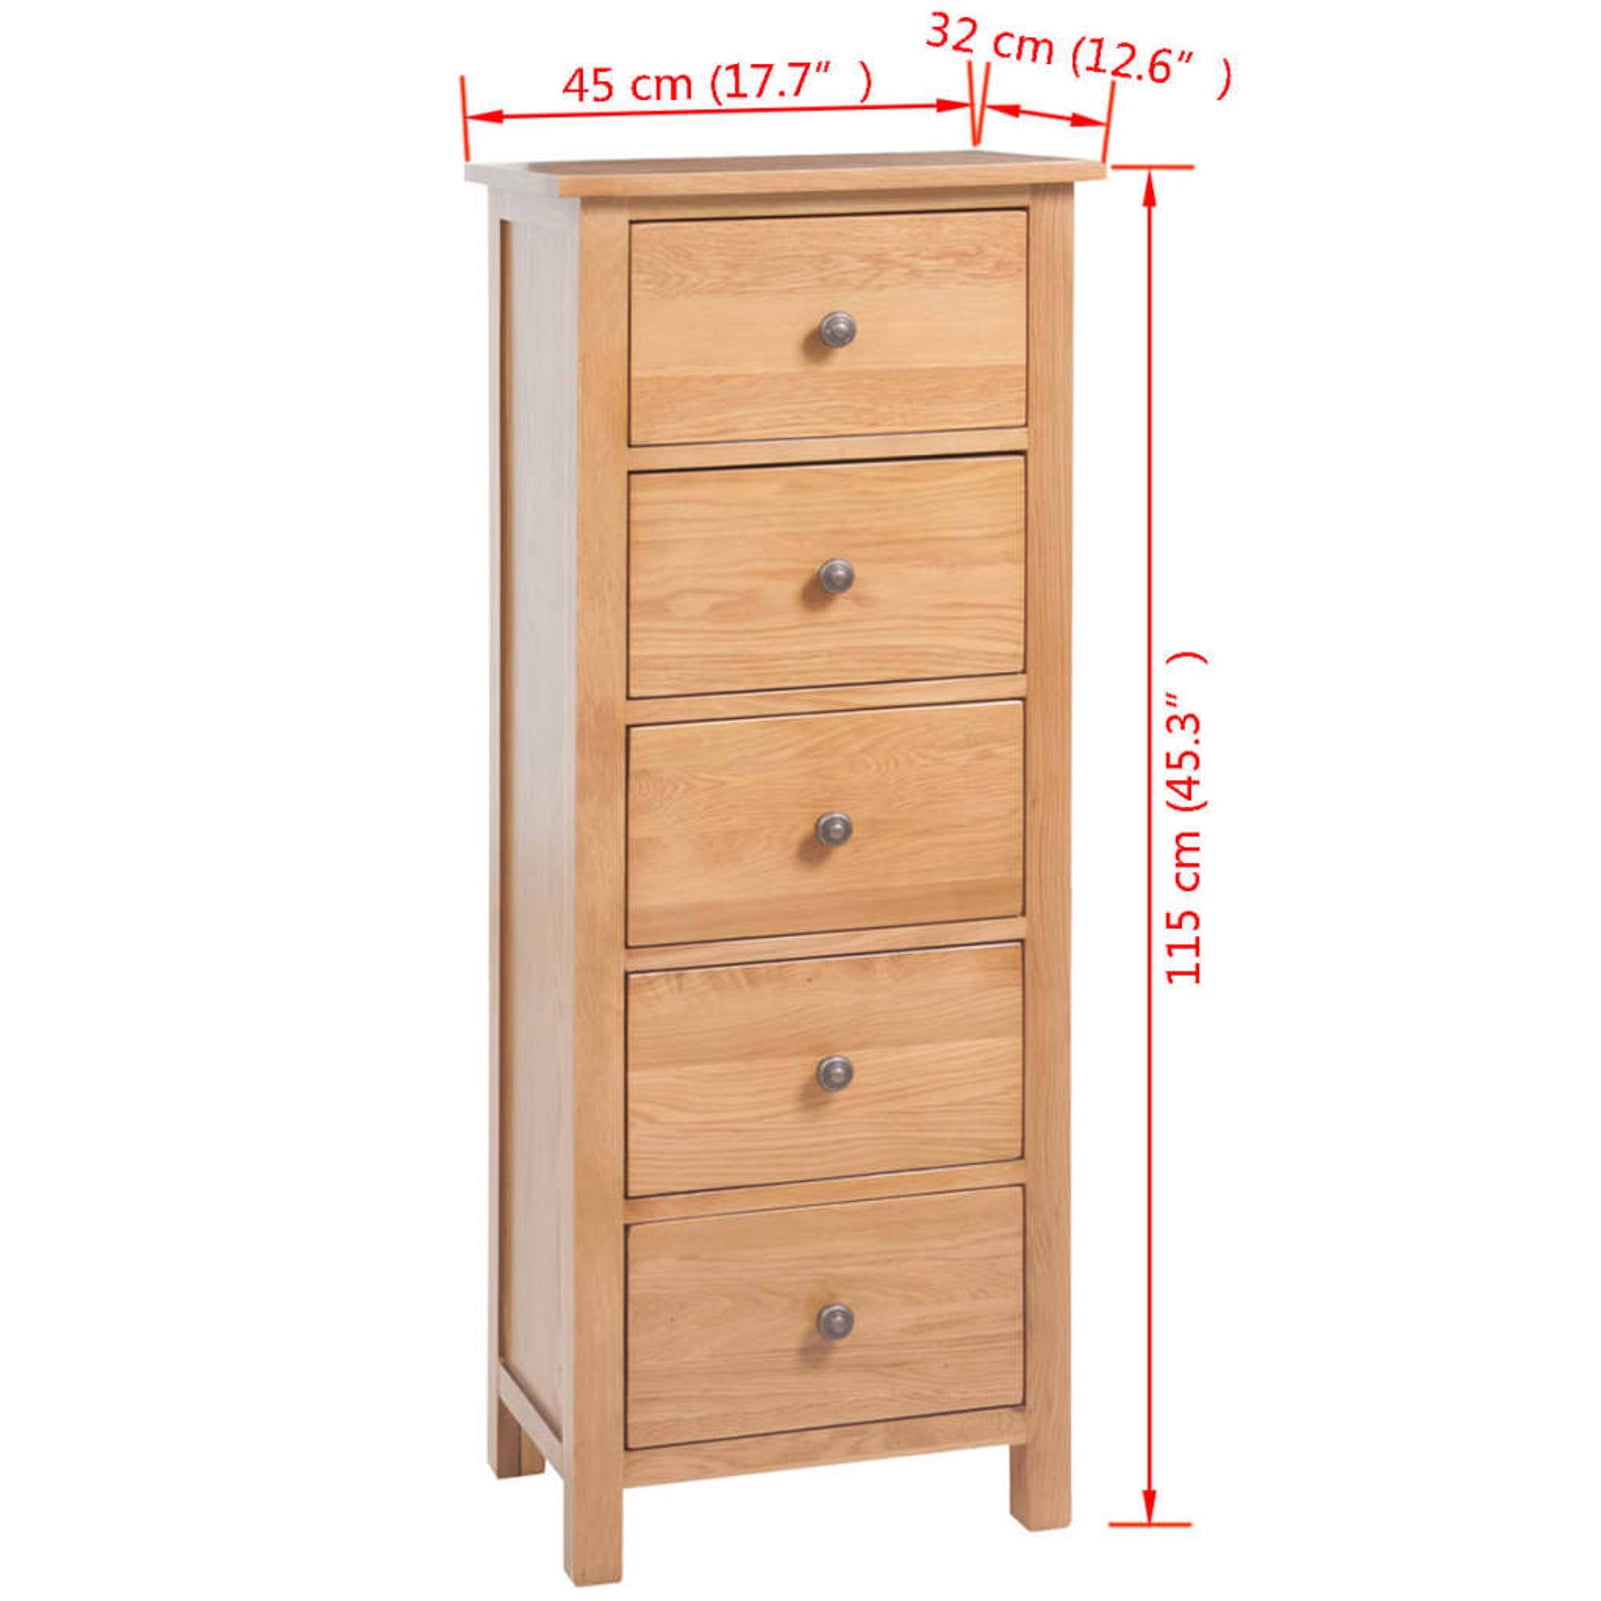 Details about   Chest of Drawers Tall Wooden Bedroom Dresser Modern Tallboy With Locks Cherry 